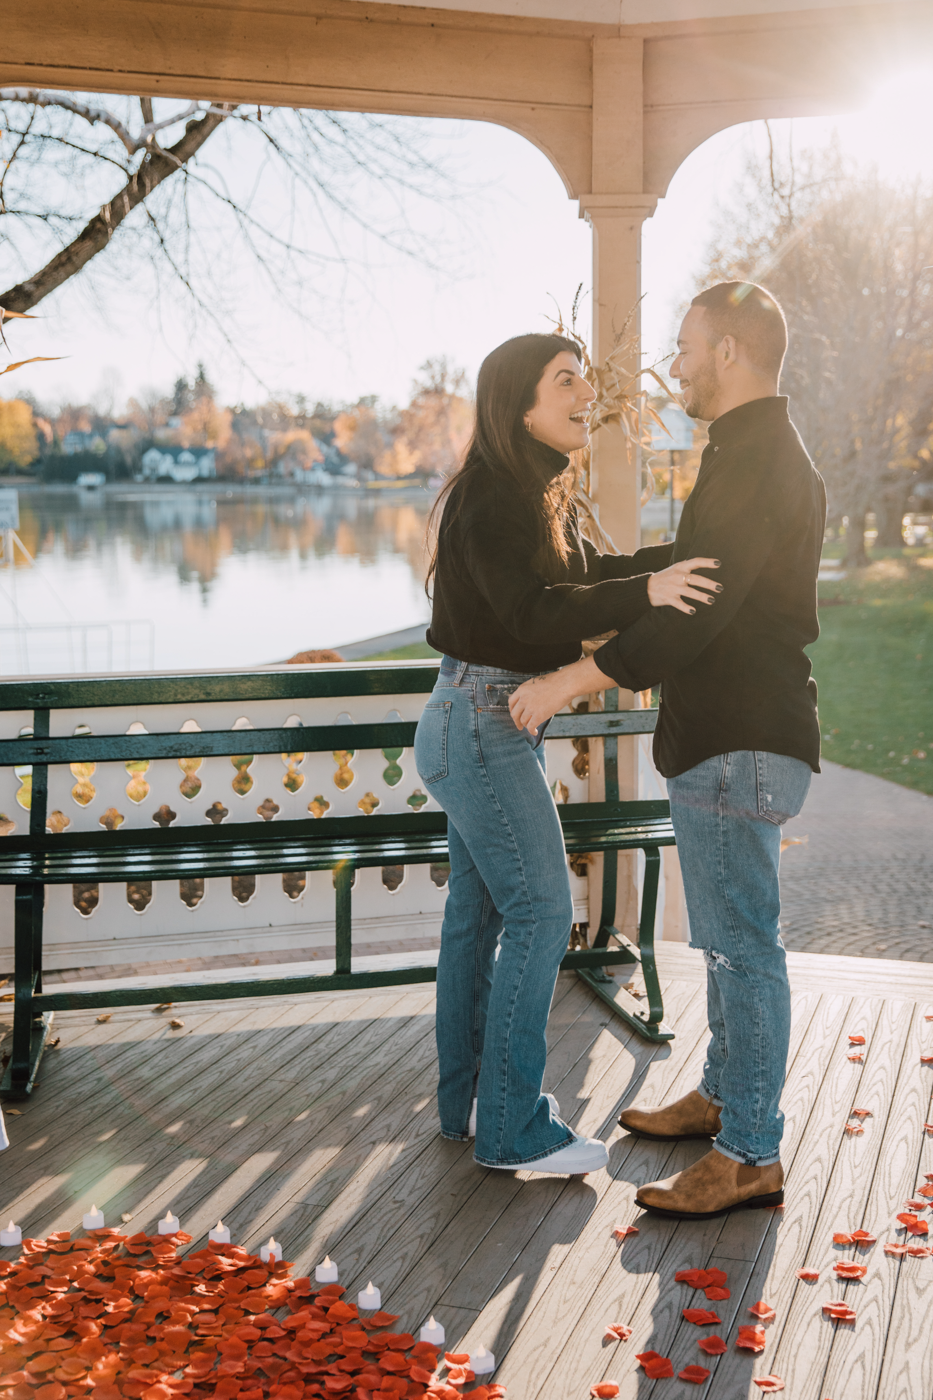  Woman is excited after surprise proposal  